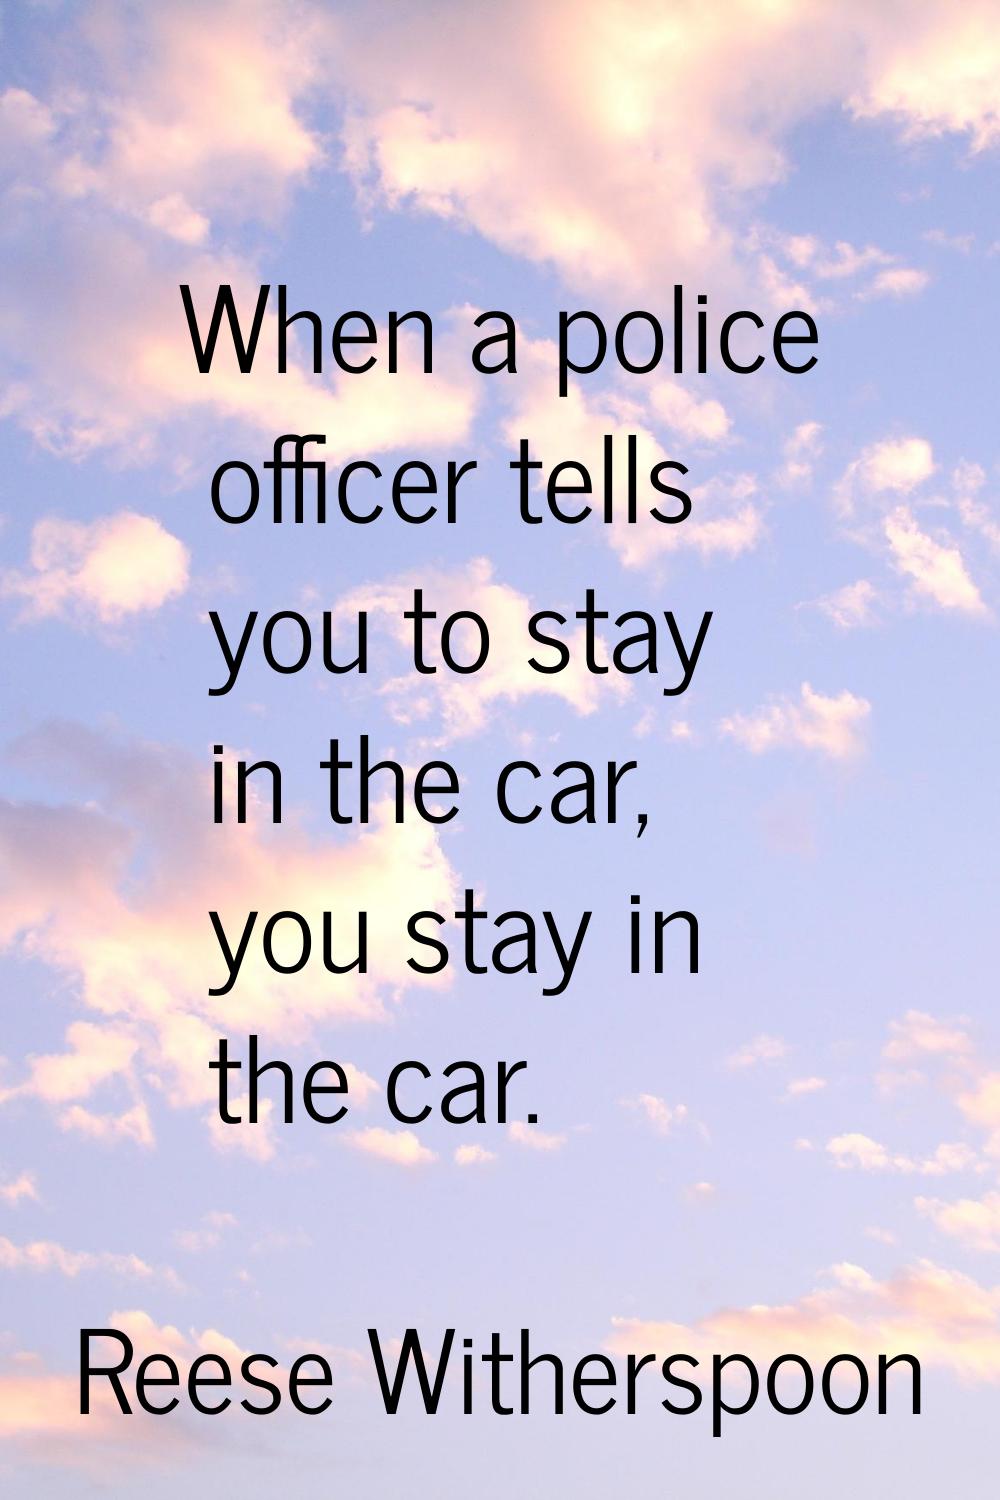 When a police officer tells you to stay in the car, you stay in the car.